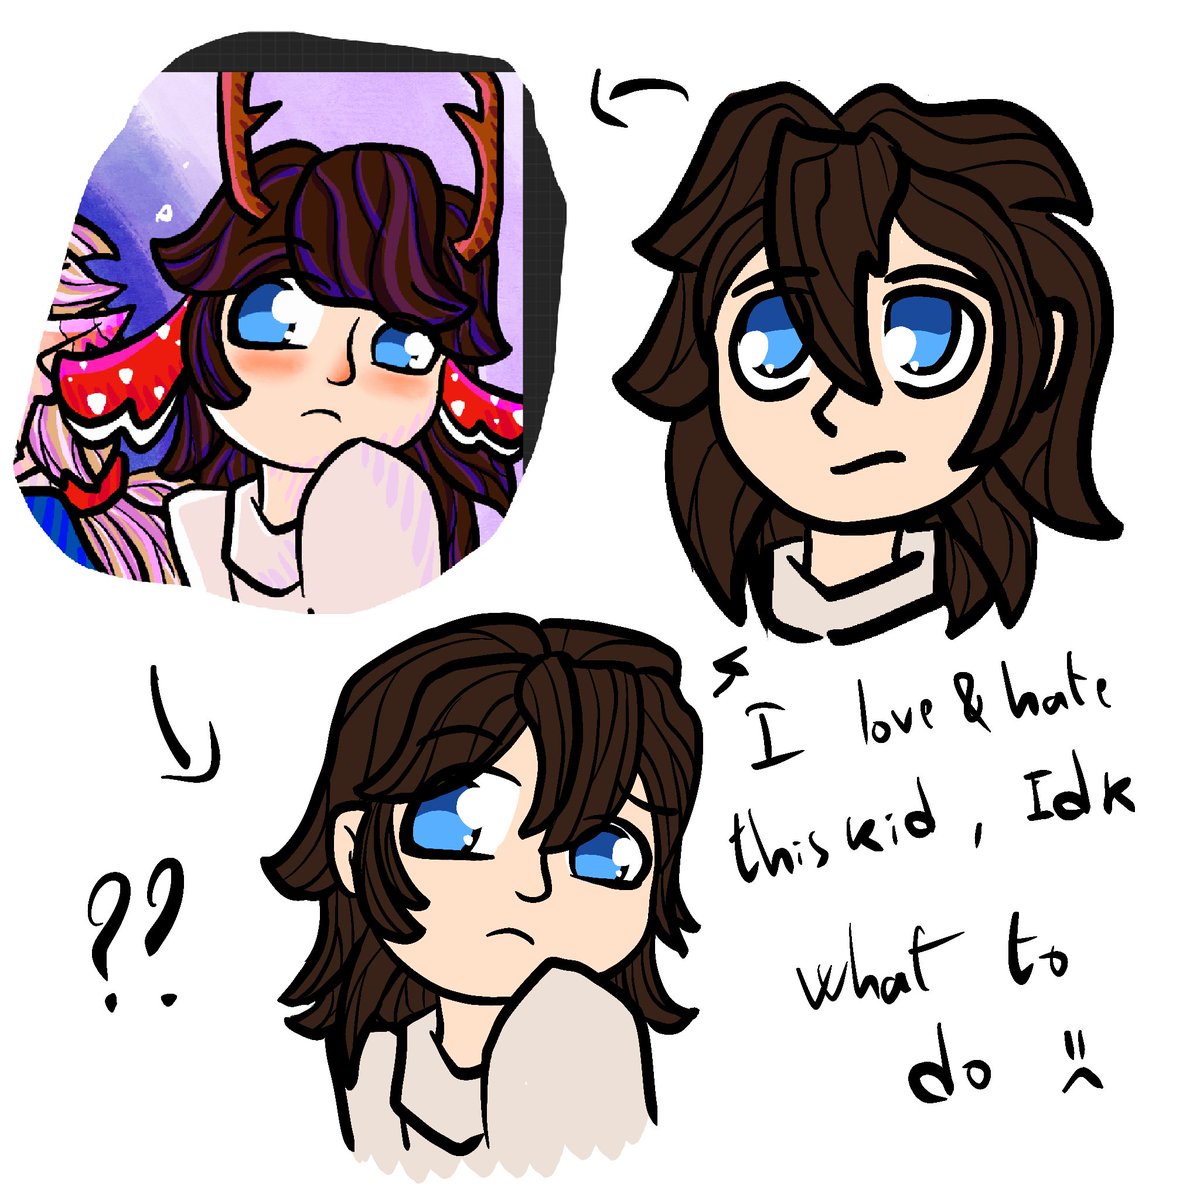 Seeking opinion: Kid Philip Wittebane

Sooo- I am not sure what to do. In an overall very short amount of time my artstyle changed A LOT. And I love it! I love the big eyes, and fluffy hair and all of that- and I think my lil Pip looks adorable BUT